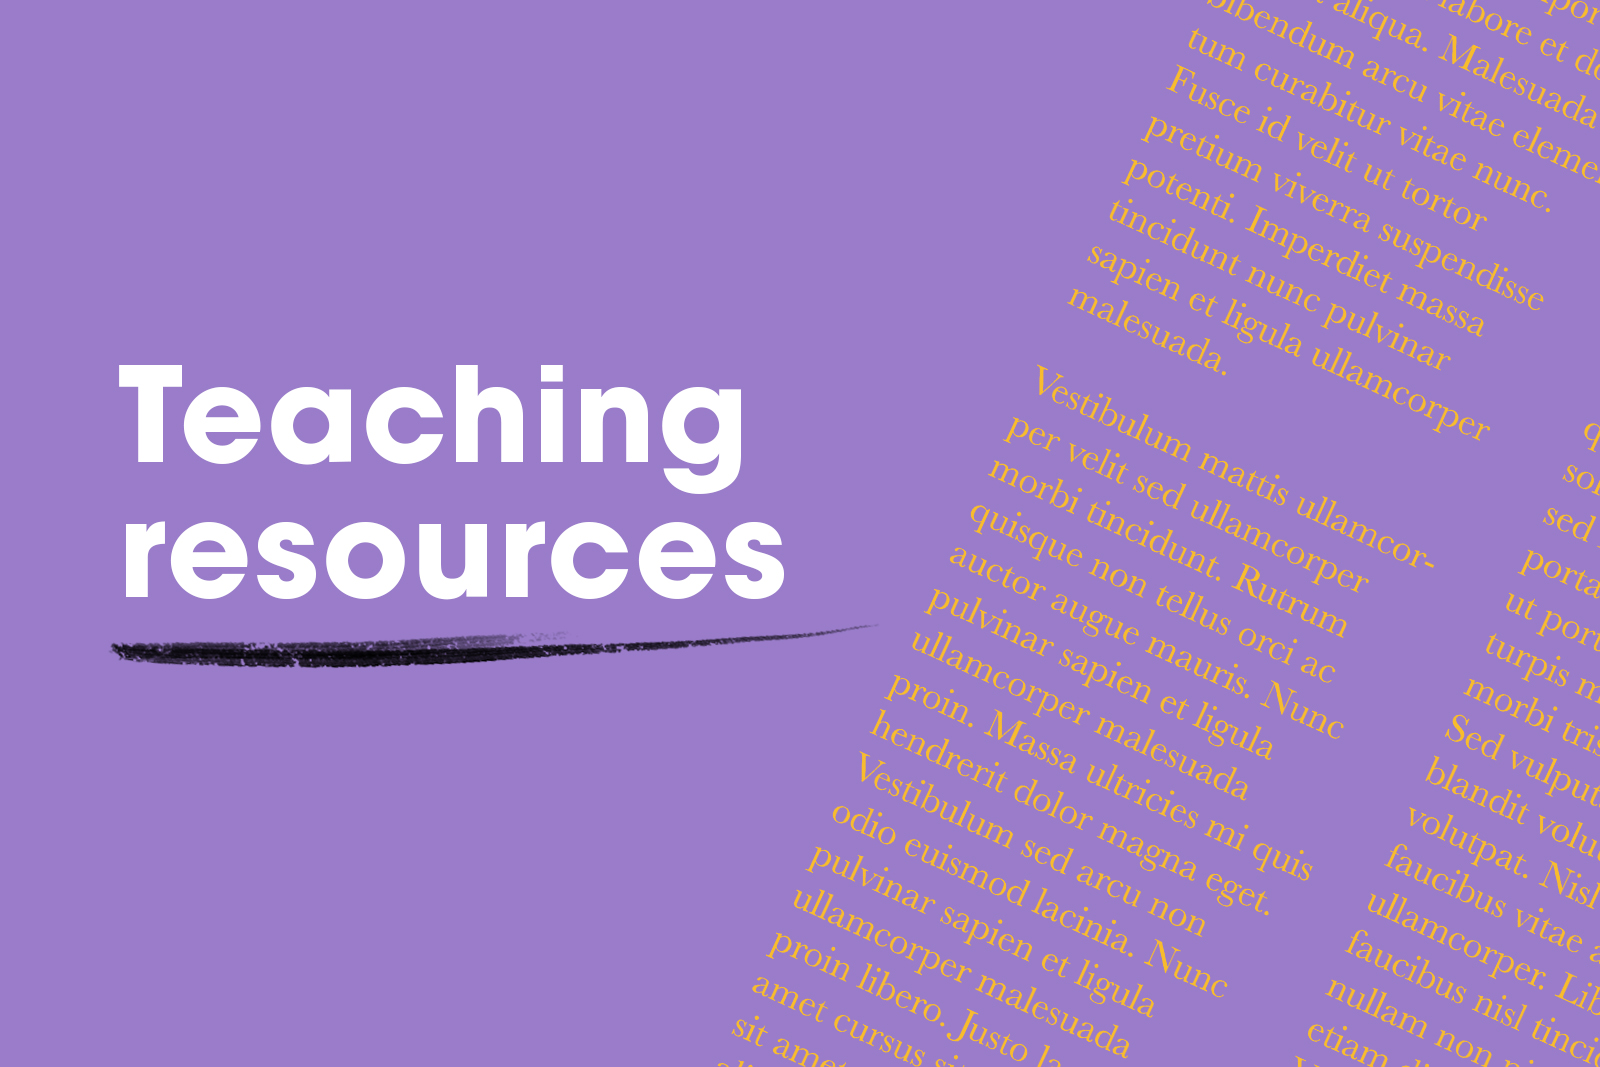 Teaching resources written on a purple background